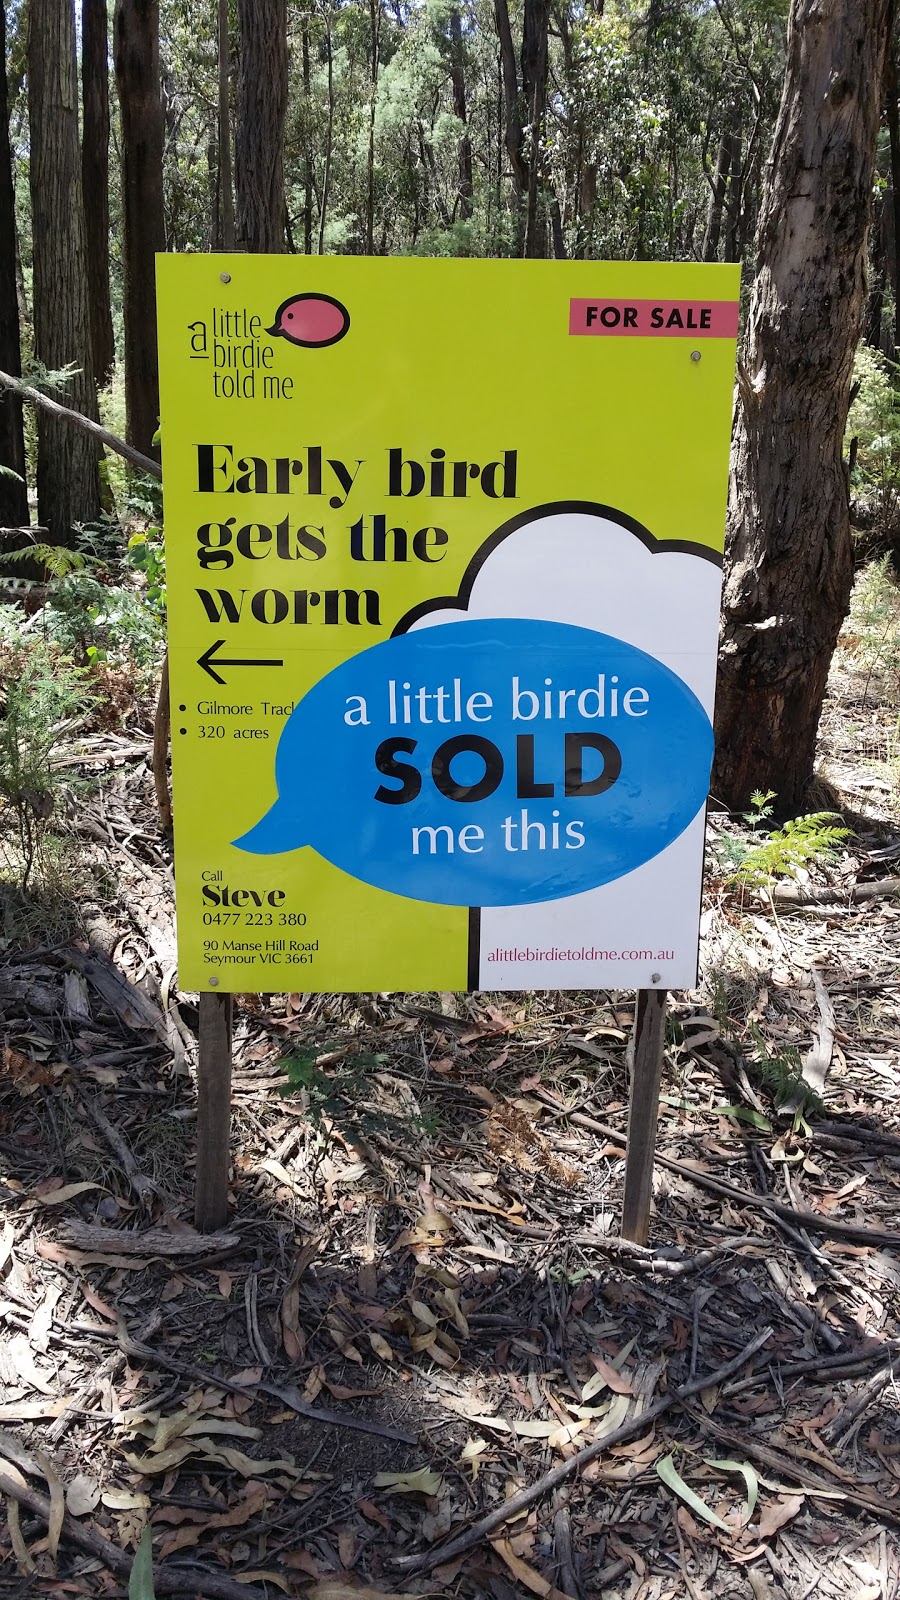 Home of A Little Birdie Told Me Real Estate | 8C Emily St, Seymour VIC 3660, Australia | Phone: (03) 5799 1330